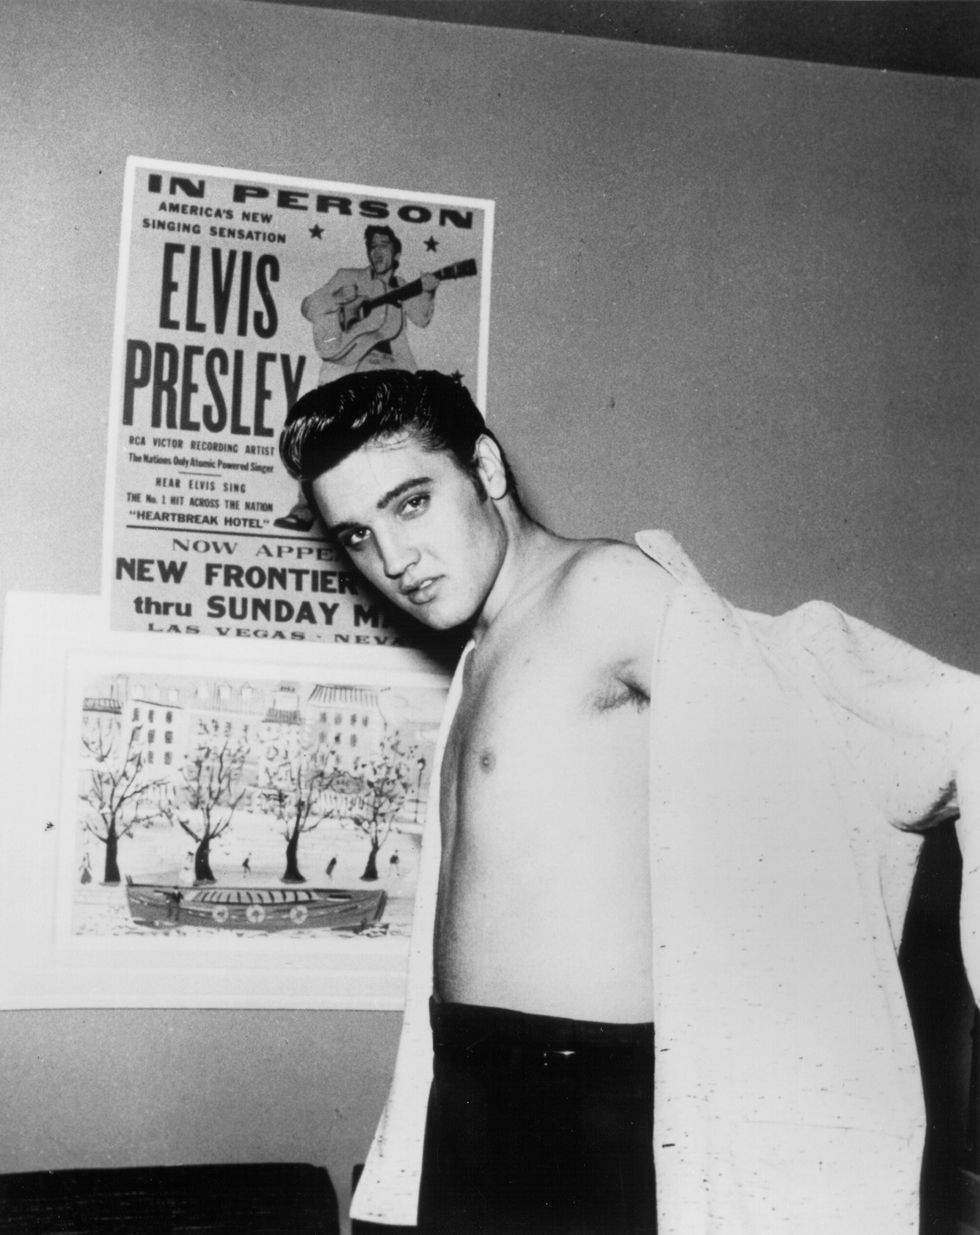 Rock and roll singer Elvis Presley in front of a concert poster with his shirt half on at the New Frontier Hotel on April 23, 1956 in Las Vegas, Nevada.